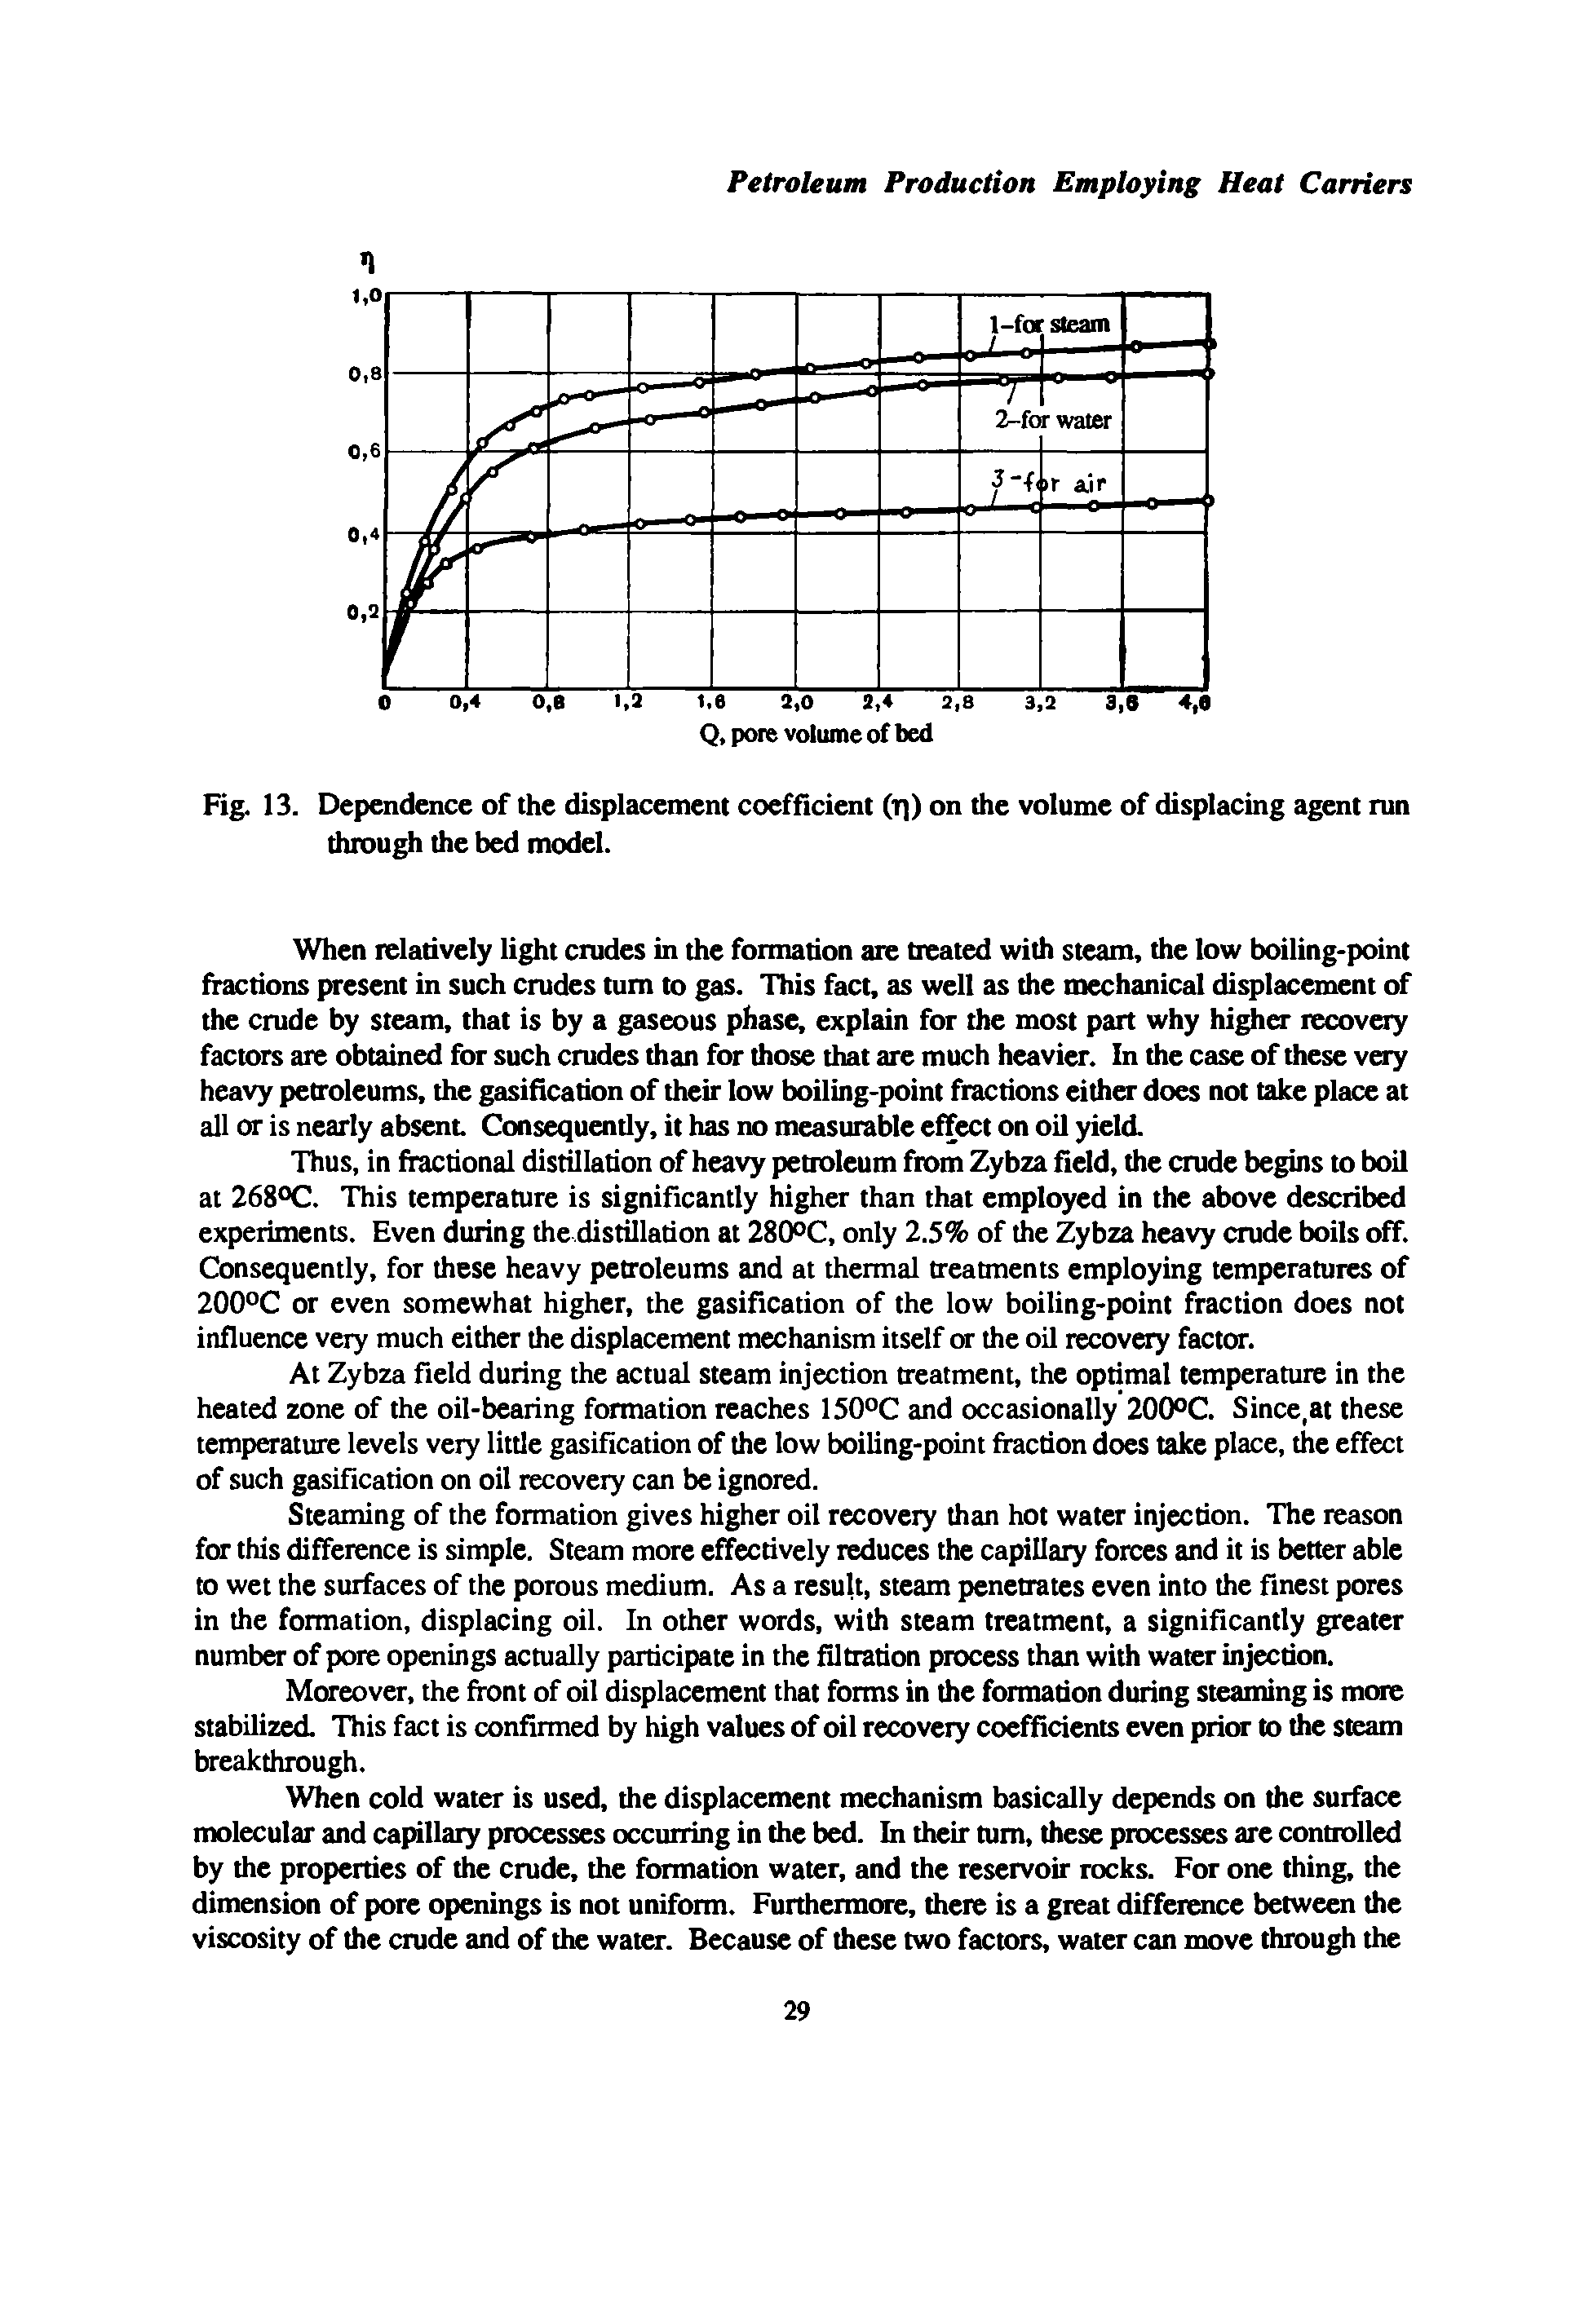 Fig. 13. Dependence of the displacement coefficient (t]) on the volume of displacing agent run through the bed model.